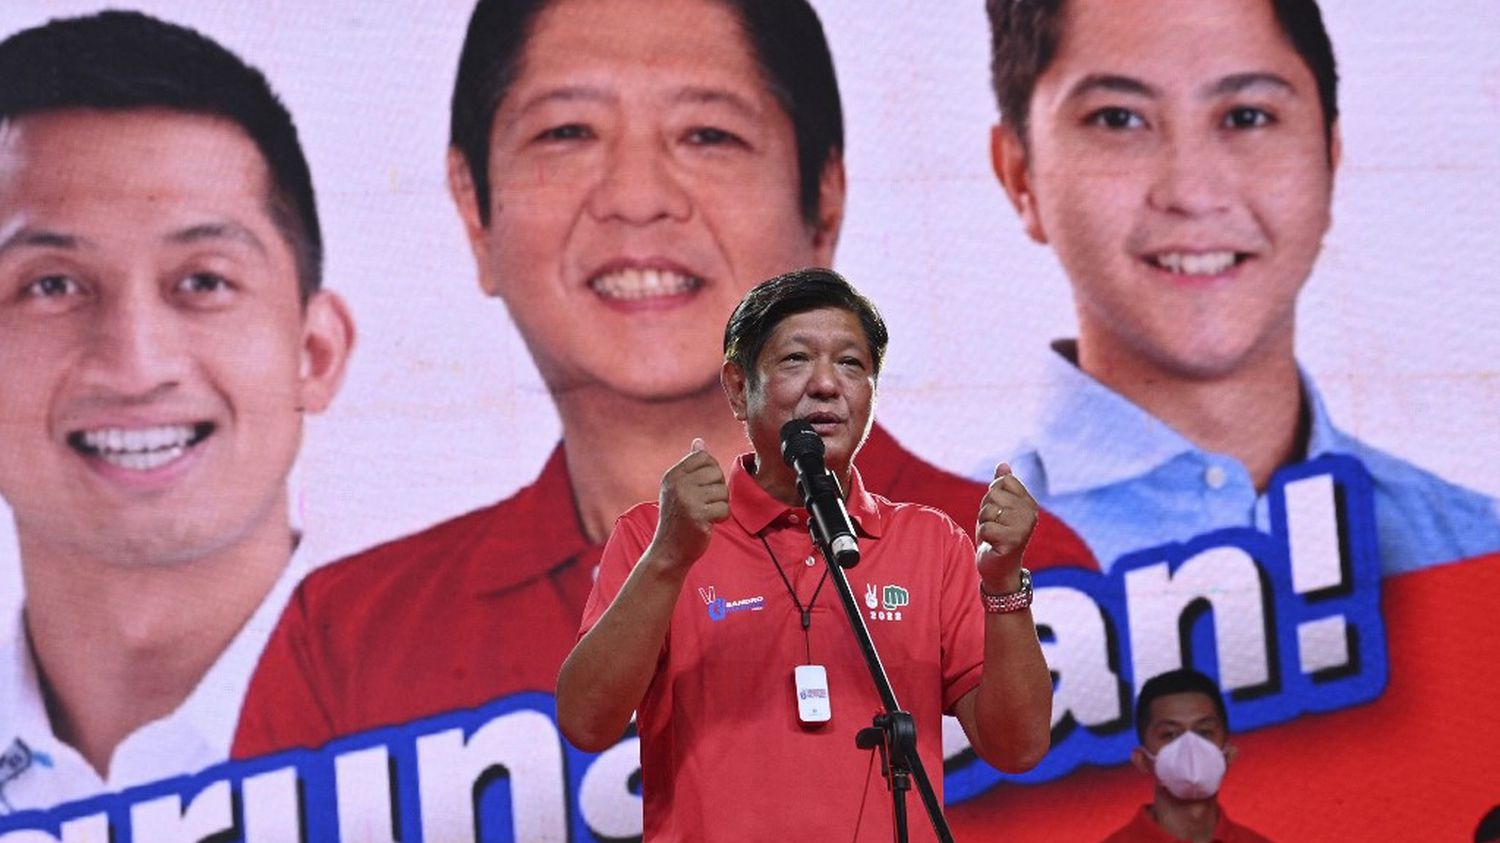 Philippines: the son of former dictator Marcos is heading for a landslide presidential victory
